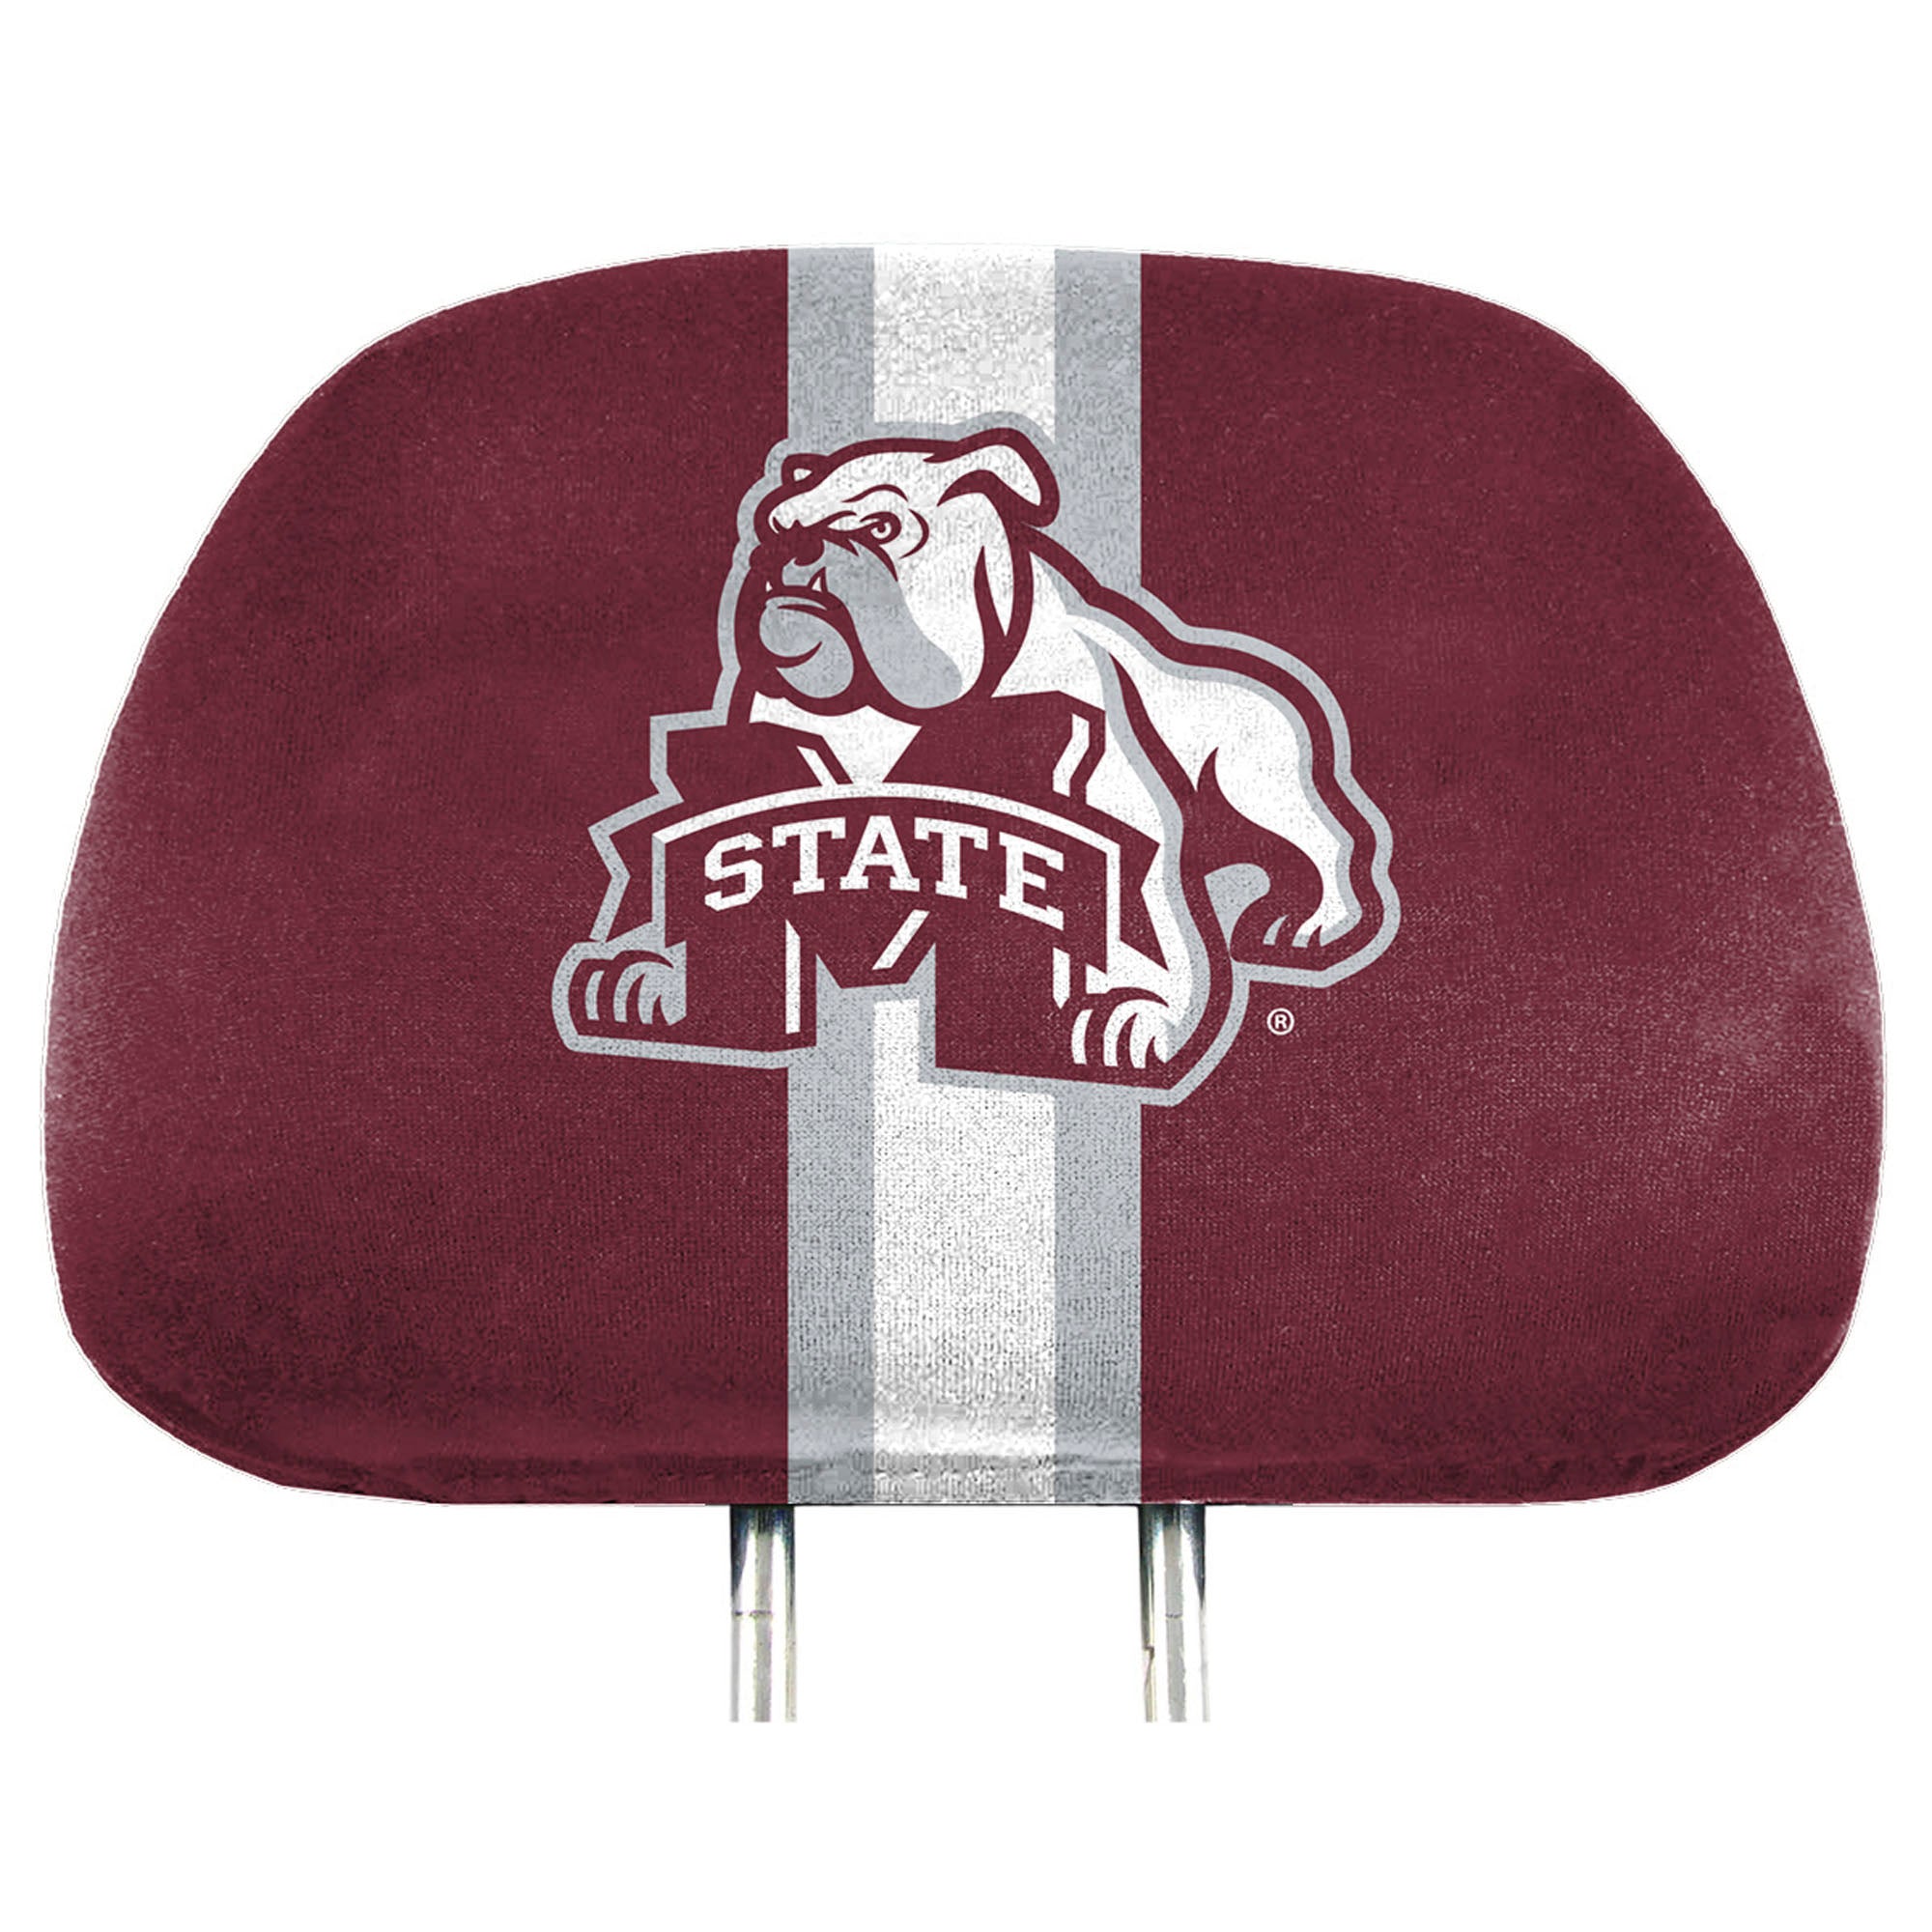 FANMATS, Mississippi State University Printed Headrest Cover